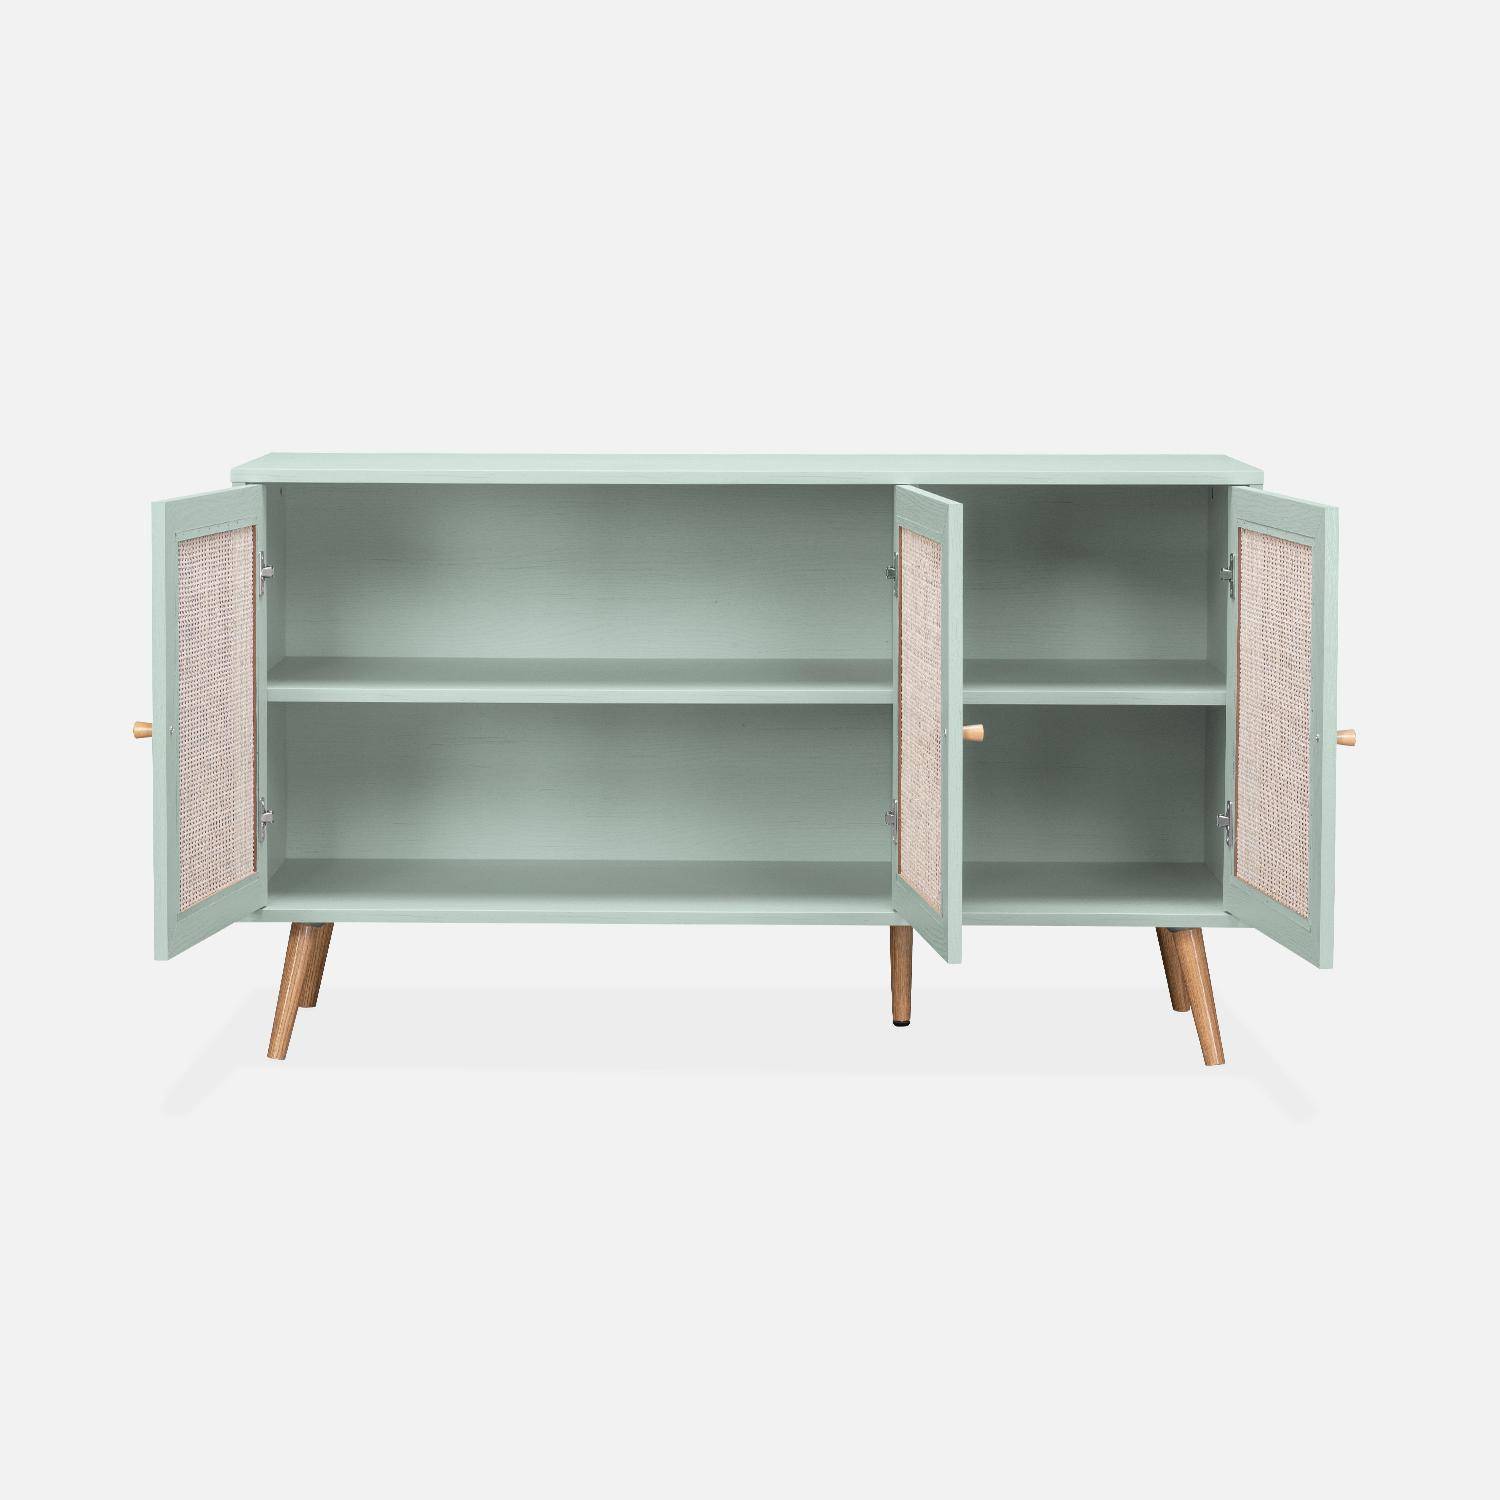 Wooden and cane rattan detail sideboard with 3 doors, 2 shelves, Scandi-style legs, 120x39x70cm - Boheme - Pastel Green Photo5